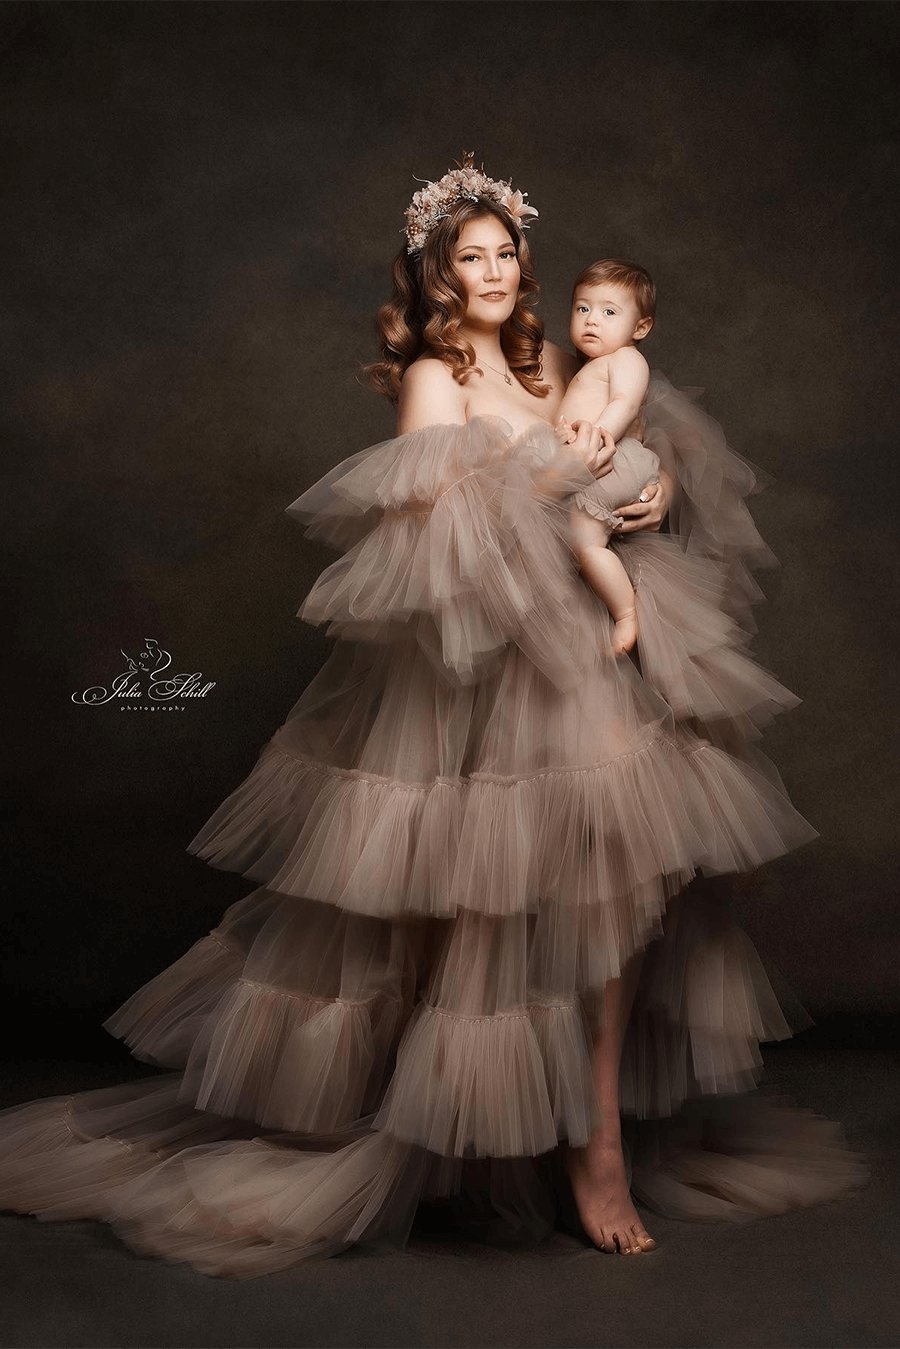 mother poses in a studio together with her kid. she is wearing a large tulle dress in sand color and a flower crown on her head.